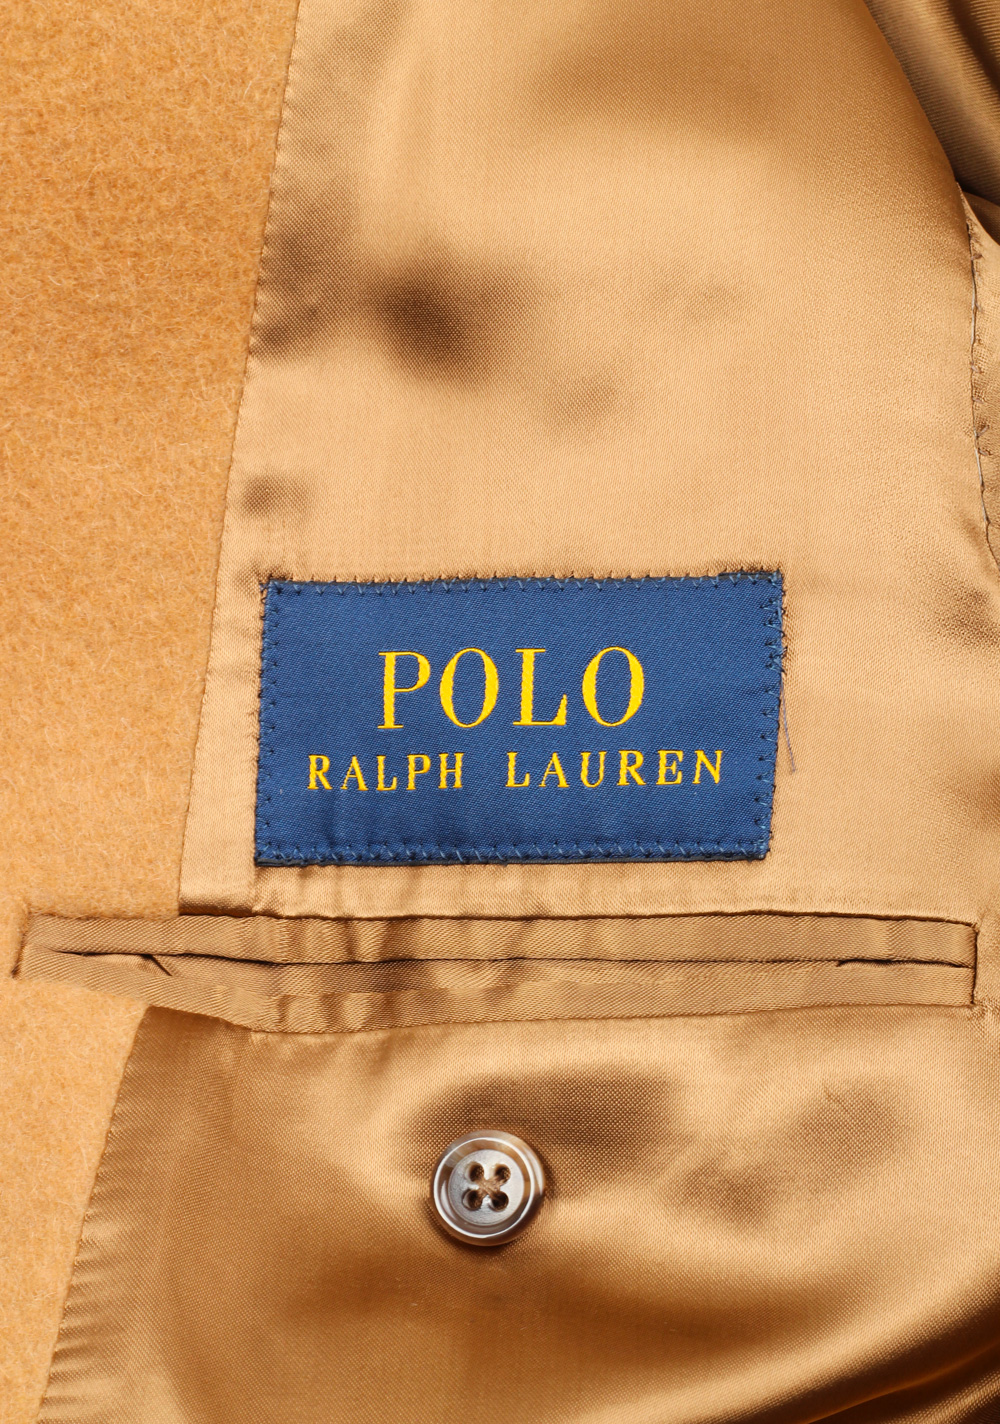 Polo Ralph Lauren Double Breasted Polo Camel Coat Size 54 / 44 U.S ...